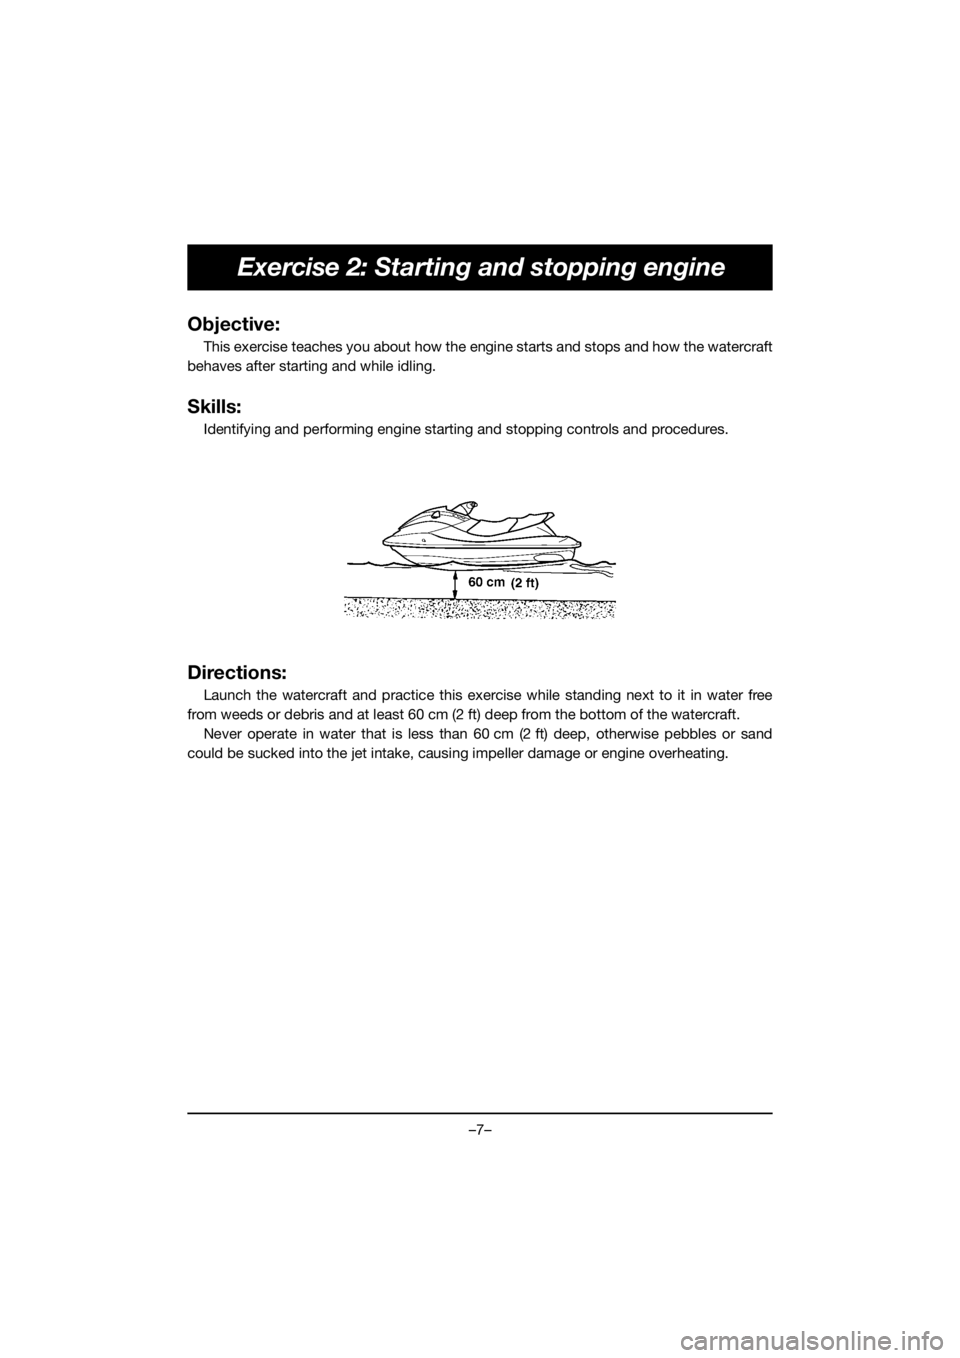 YAMAHA EX DELUXE 2019 User Guide –7–
Exercise 2: Starting and stopping engine
Objective:
This exercise teaches you about how the engine starts and stops and how the watercraft
behaves after starting and while idling.
Skills:
Iden